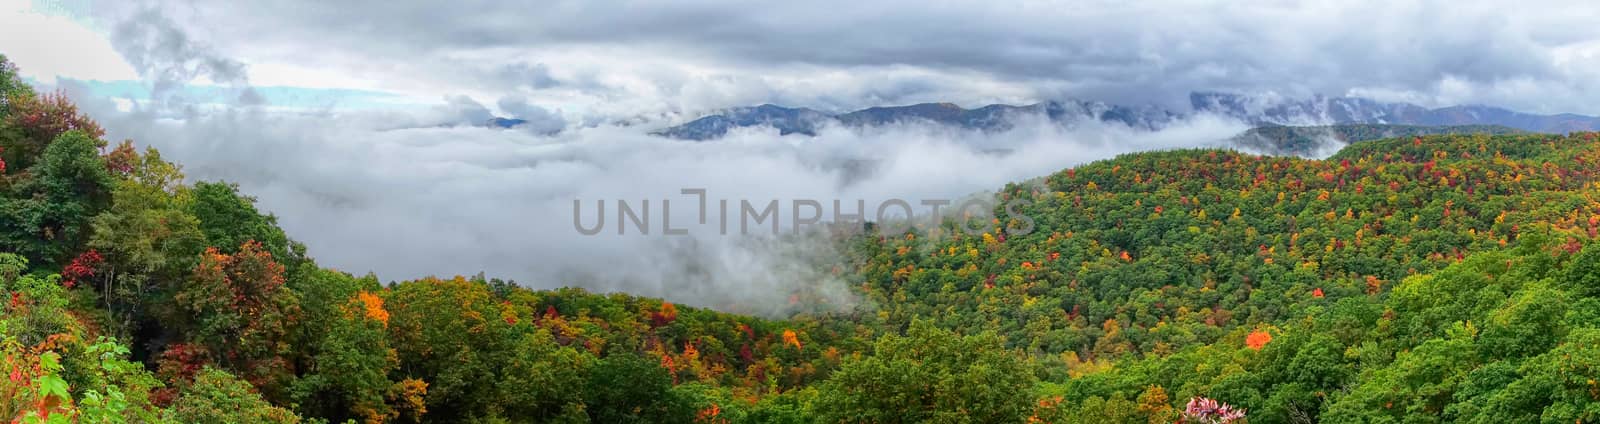 Panorama of stretch of Blue Ridge Parkway near Asheville in Western North Carolina